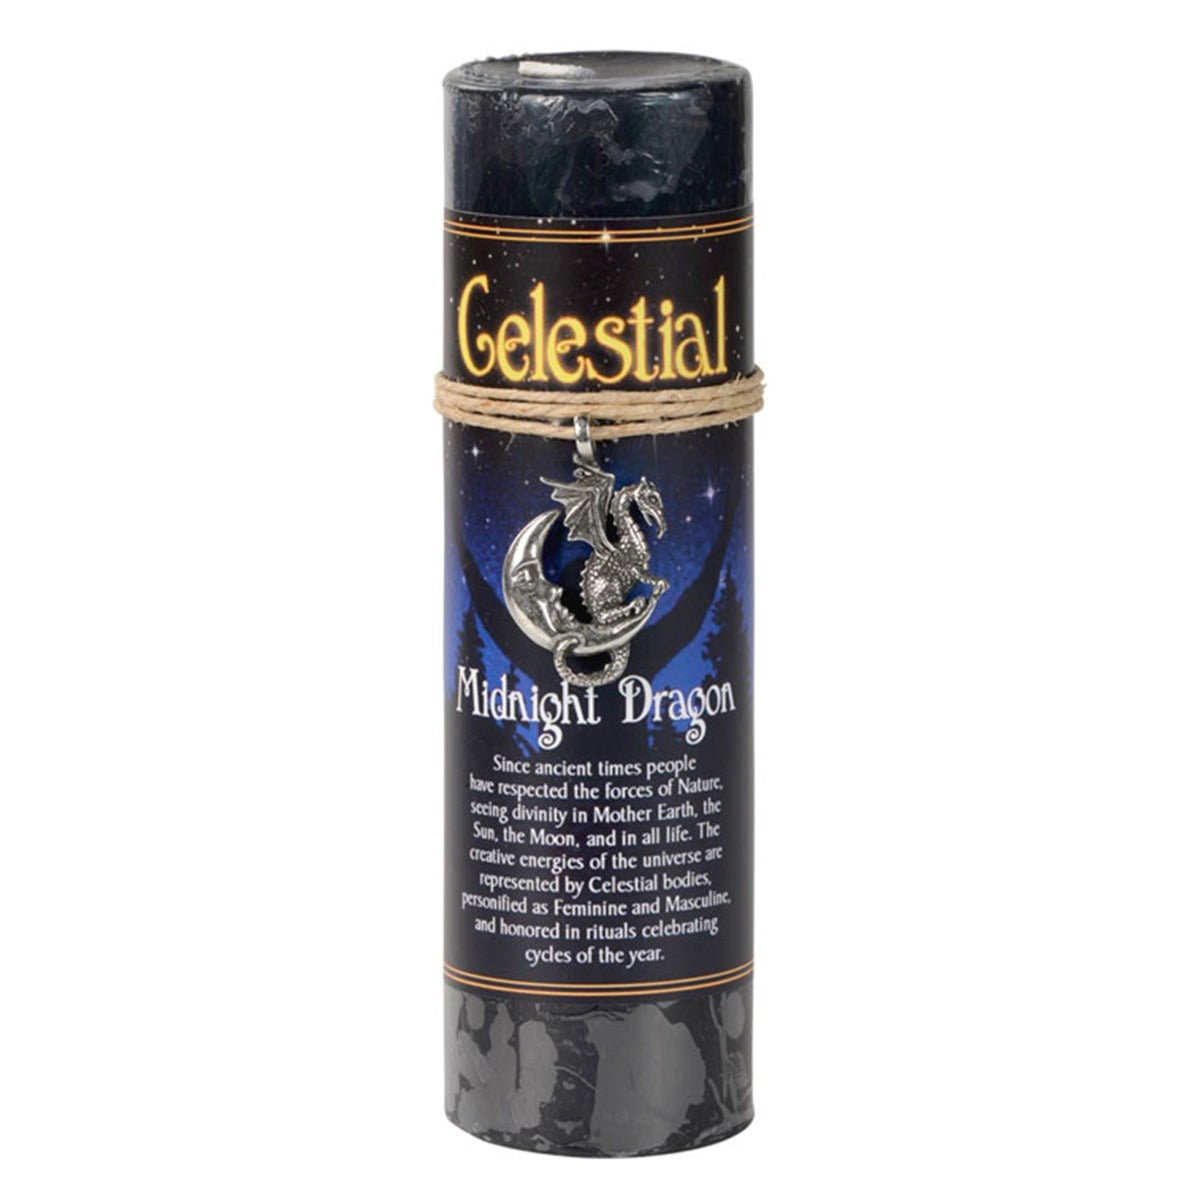 Celestial Midnight Dragon Candle with Pendant - 13 Moons